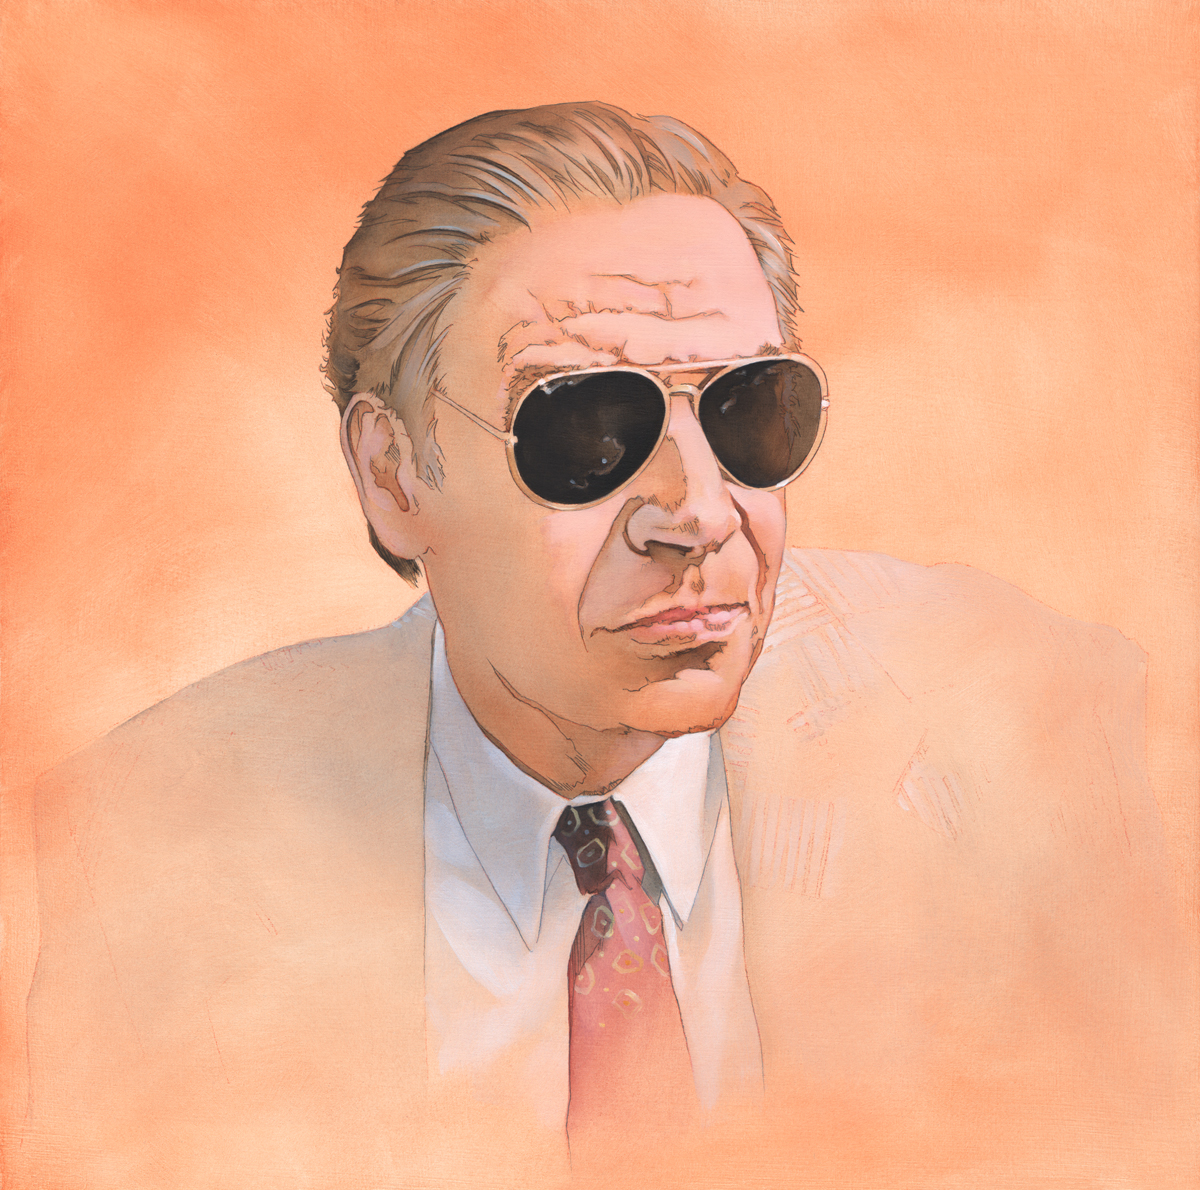 And Jerry Orbachs. In fact, I'm on the verge of completing the finest Jerry Orbach portrait of my career.  https://brandonbird.myshopify.com/search?type=product&q=orbach